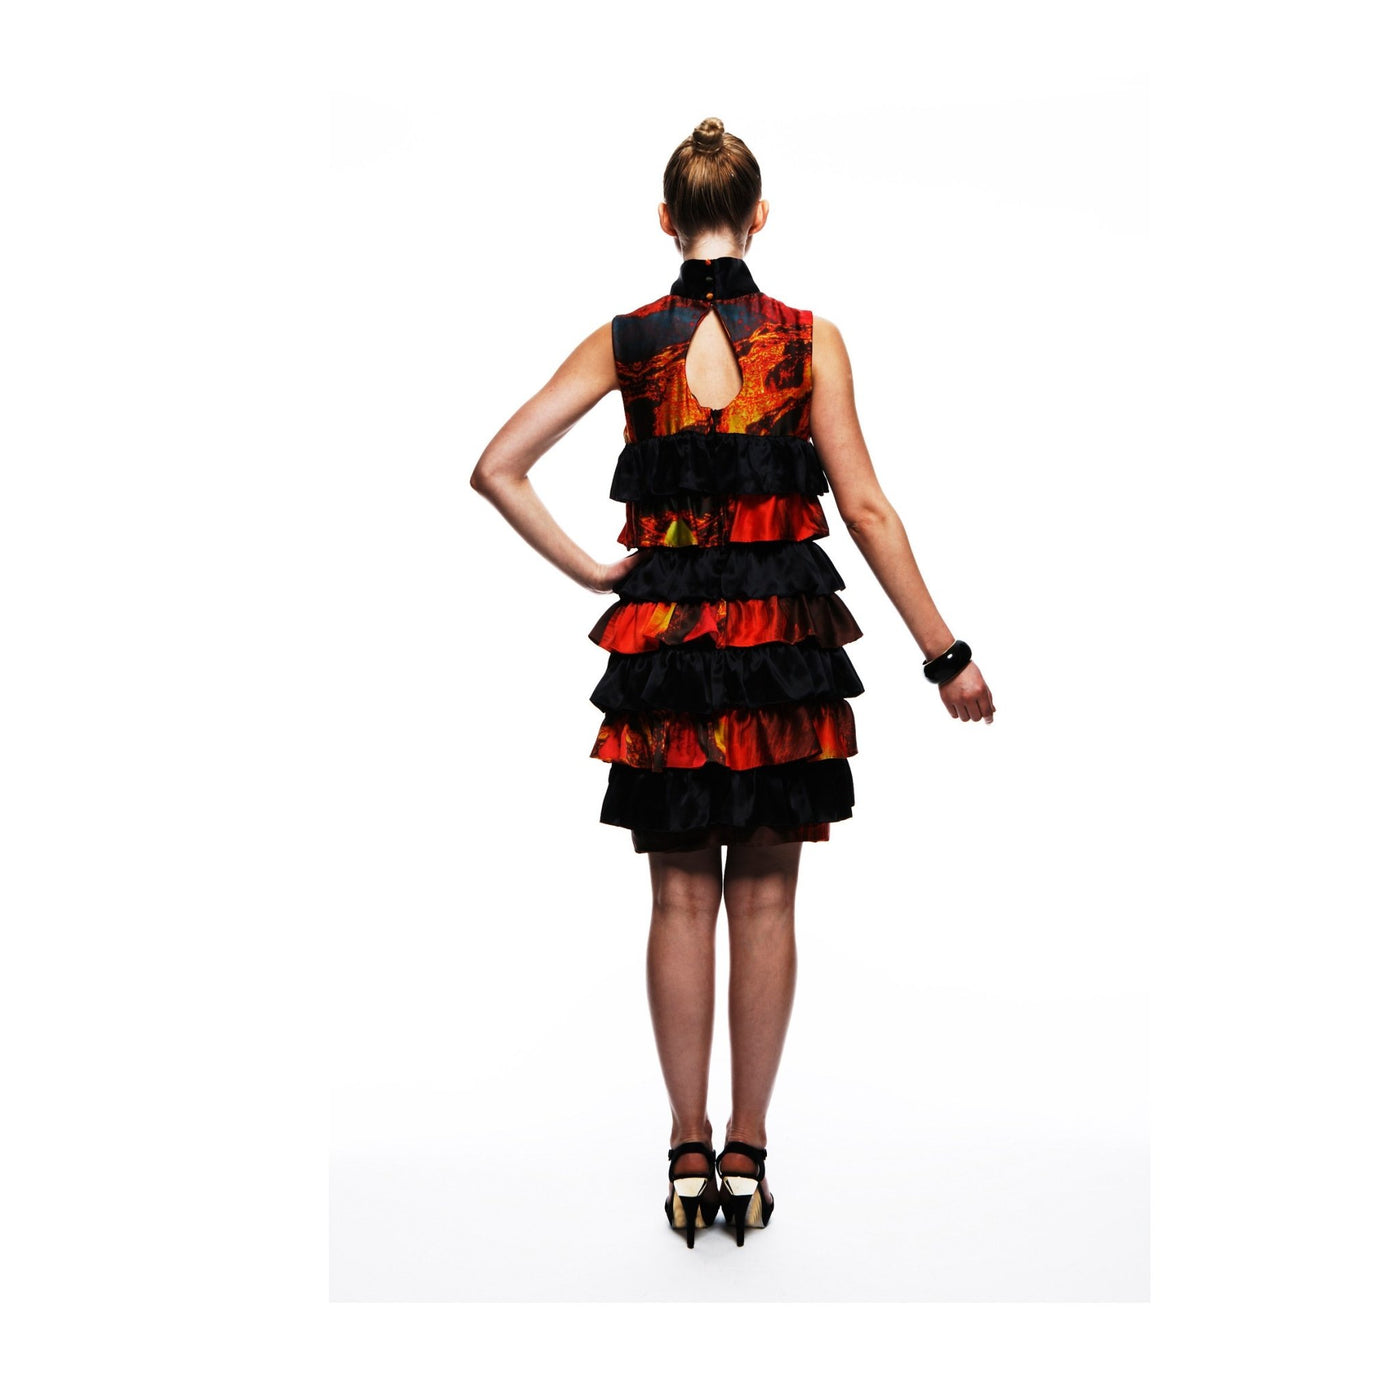 LAVA FRILL DRESS - The Clothing LoungeTramp in Disguise